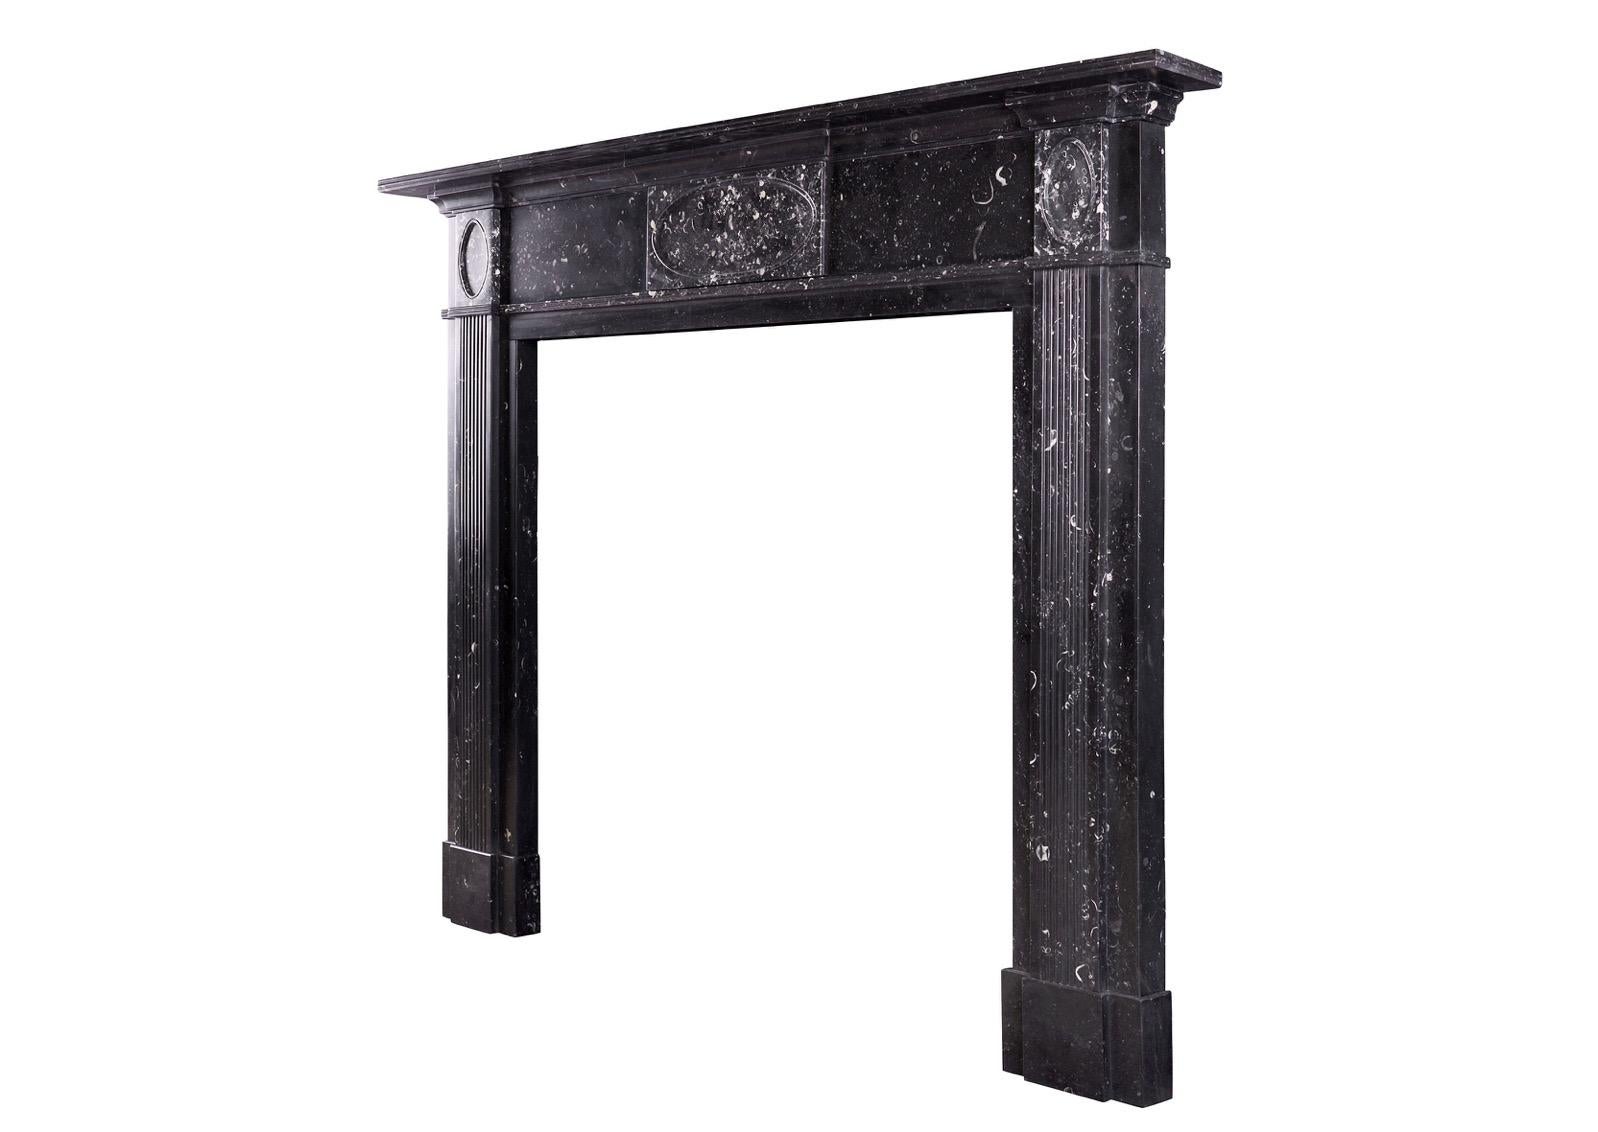 Scottish Regency Fireplace in Black Kilkenny Marble In Good Condition For Sale In London, GB